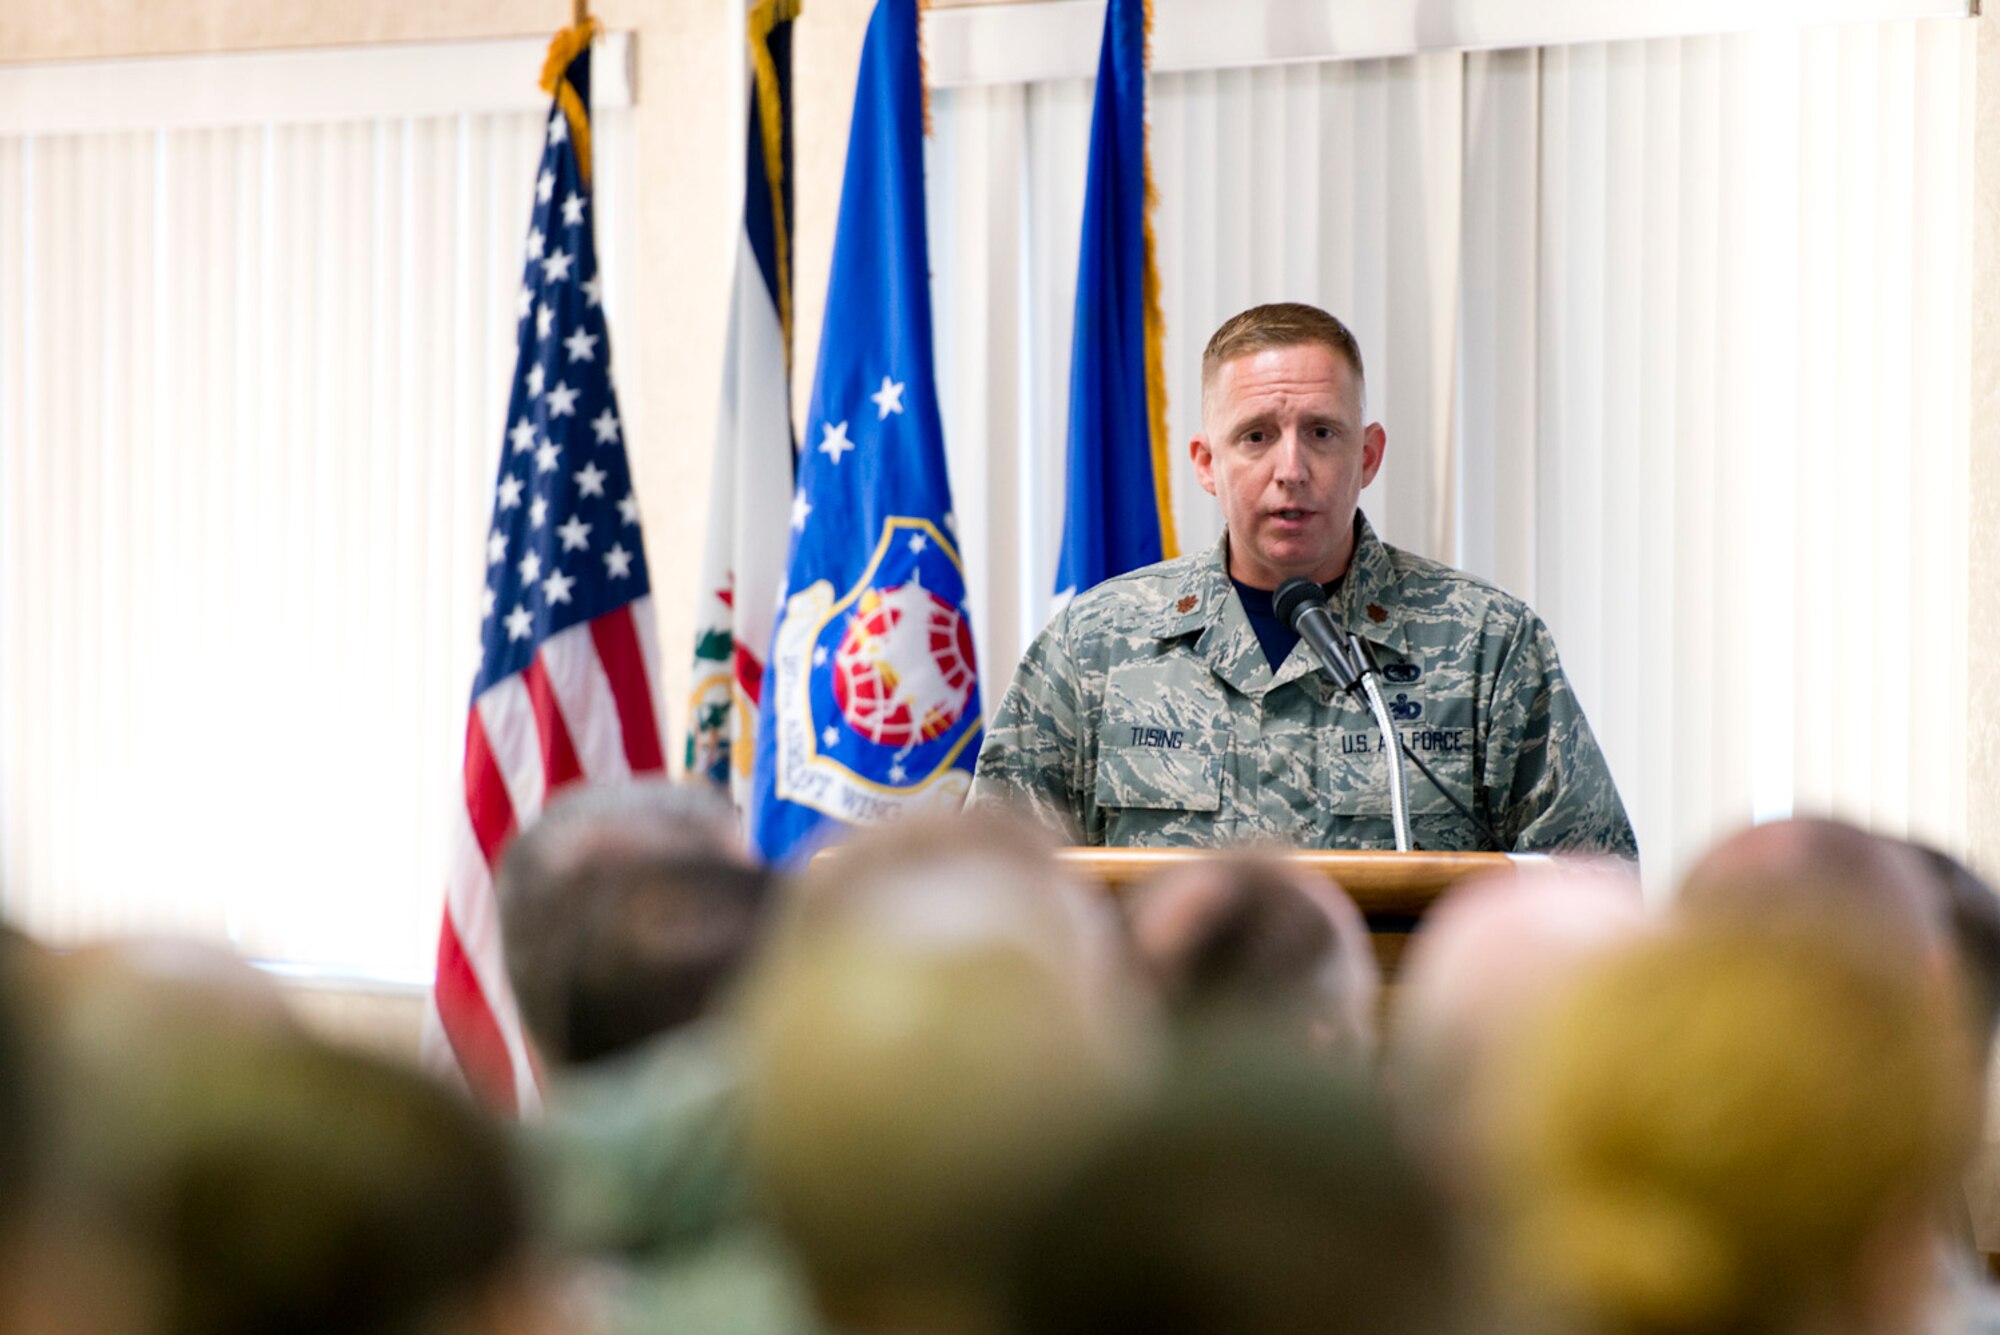 Major Christopher Tusing, the 167th Airlift Wing's director of inspections, addresses
the Air Mobility Command Inspector General and his inspection team during the Wing's
capstone event in-brief Nov. 4. (U.S. Air National Guard photo by Senior Master Sgt. Emily Beightol-Deyerle)
